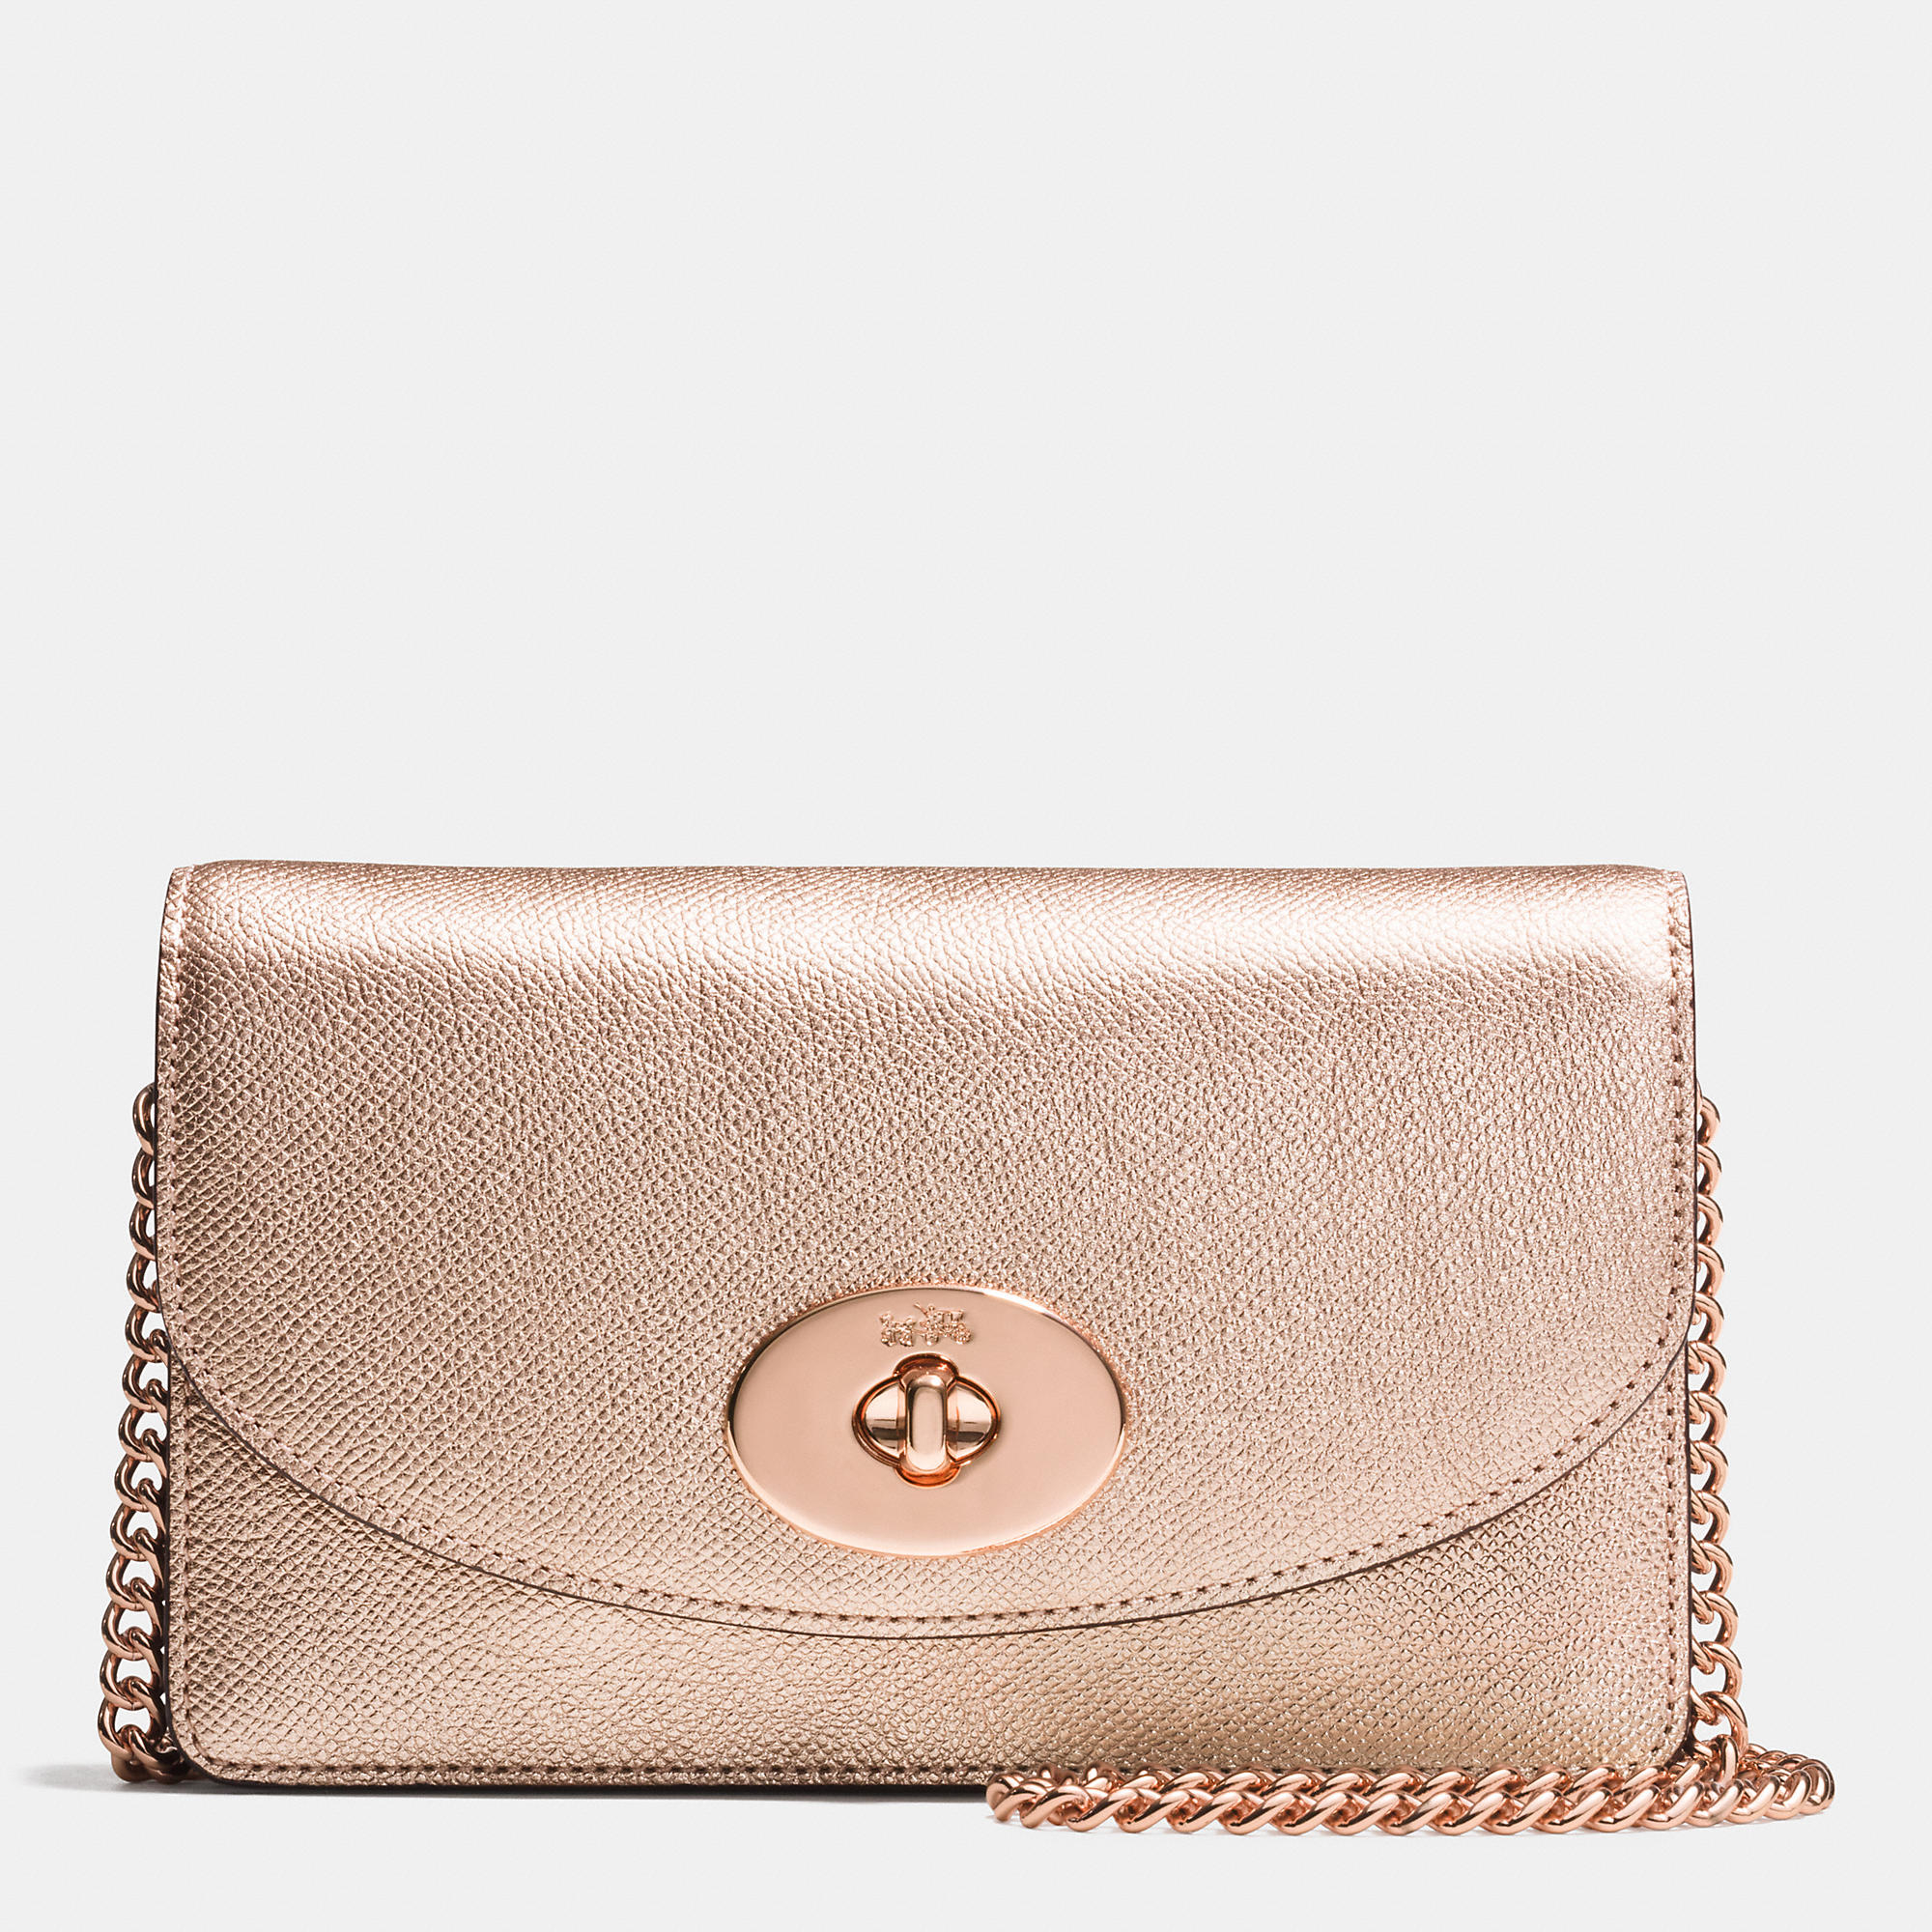 Lyst - Coach Clutch Wallet With Chain In Metallic Crossgrain Leather in